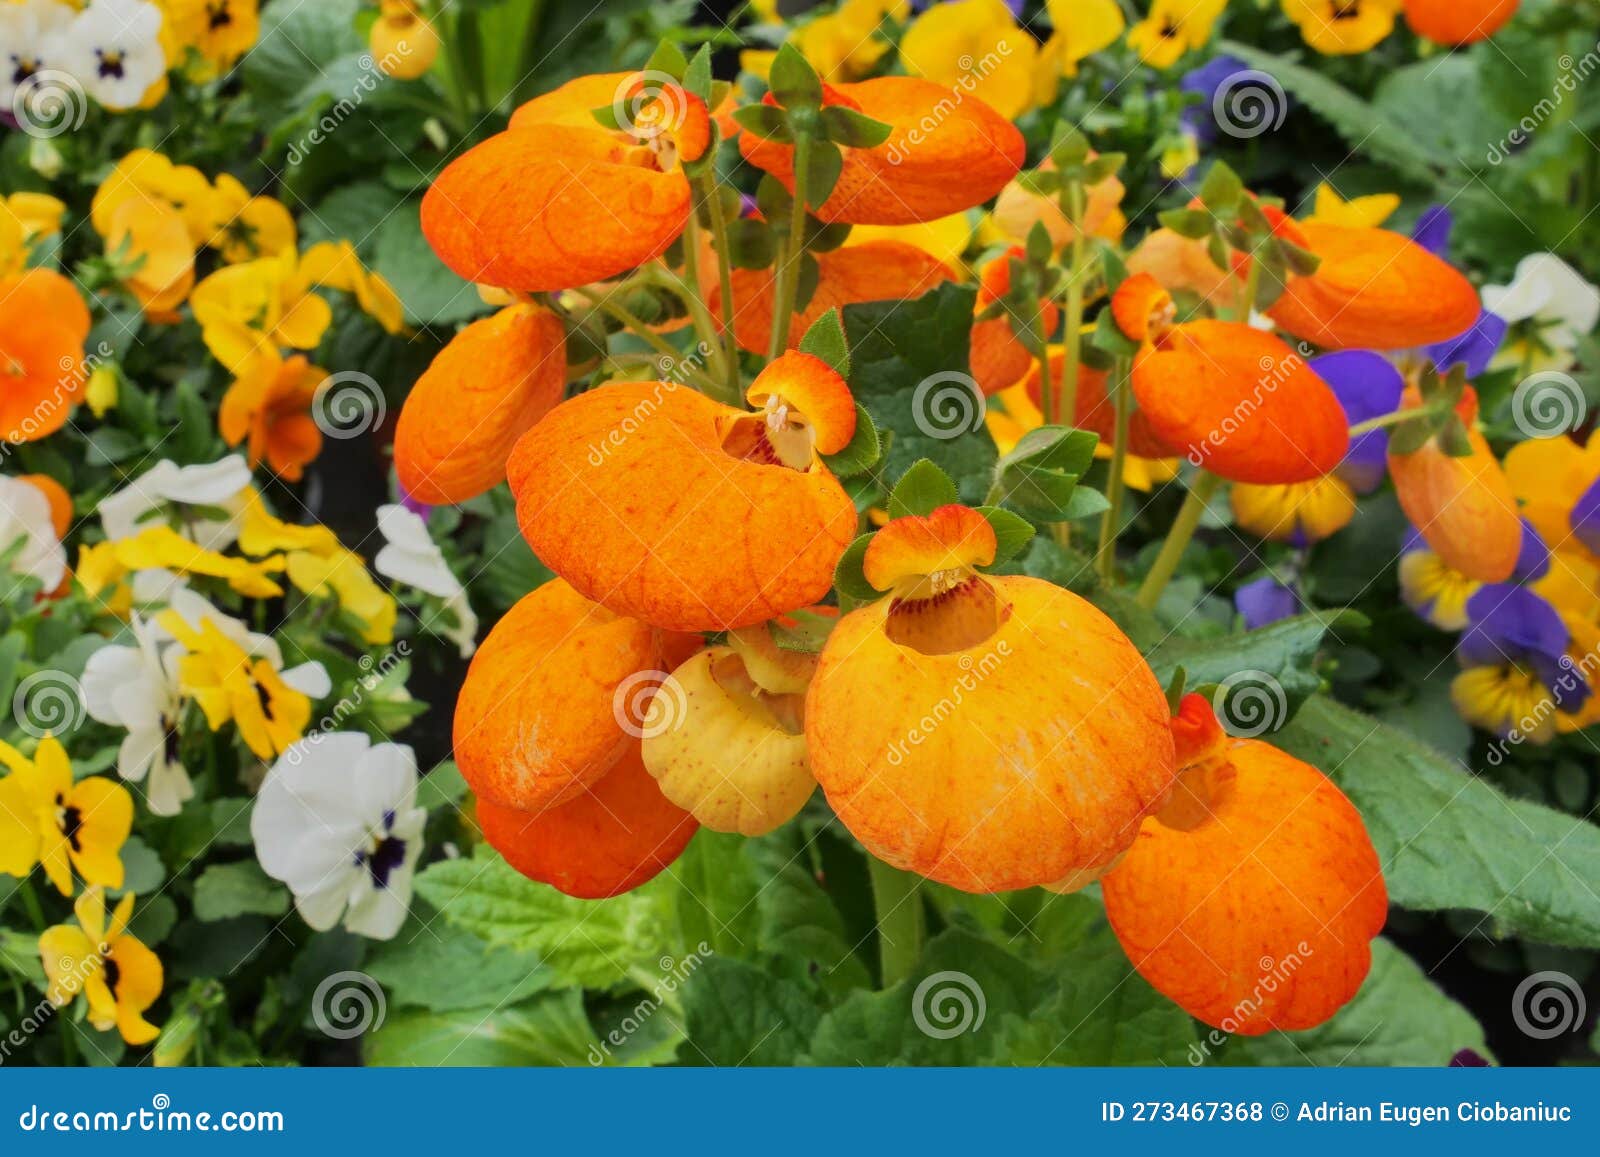 beautiful calceolaria integrifolia flower also called lady s purse slipper pocketbook 273467368